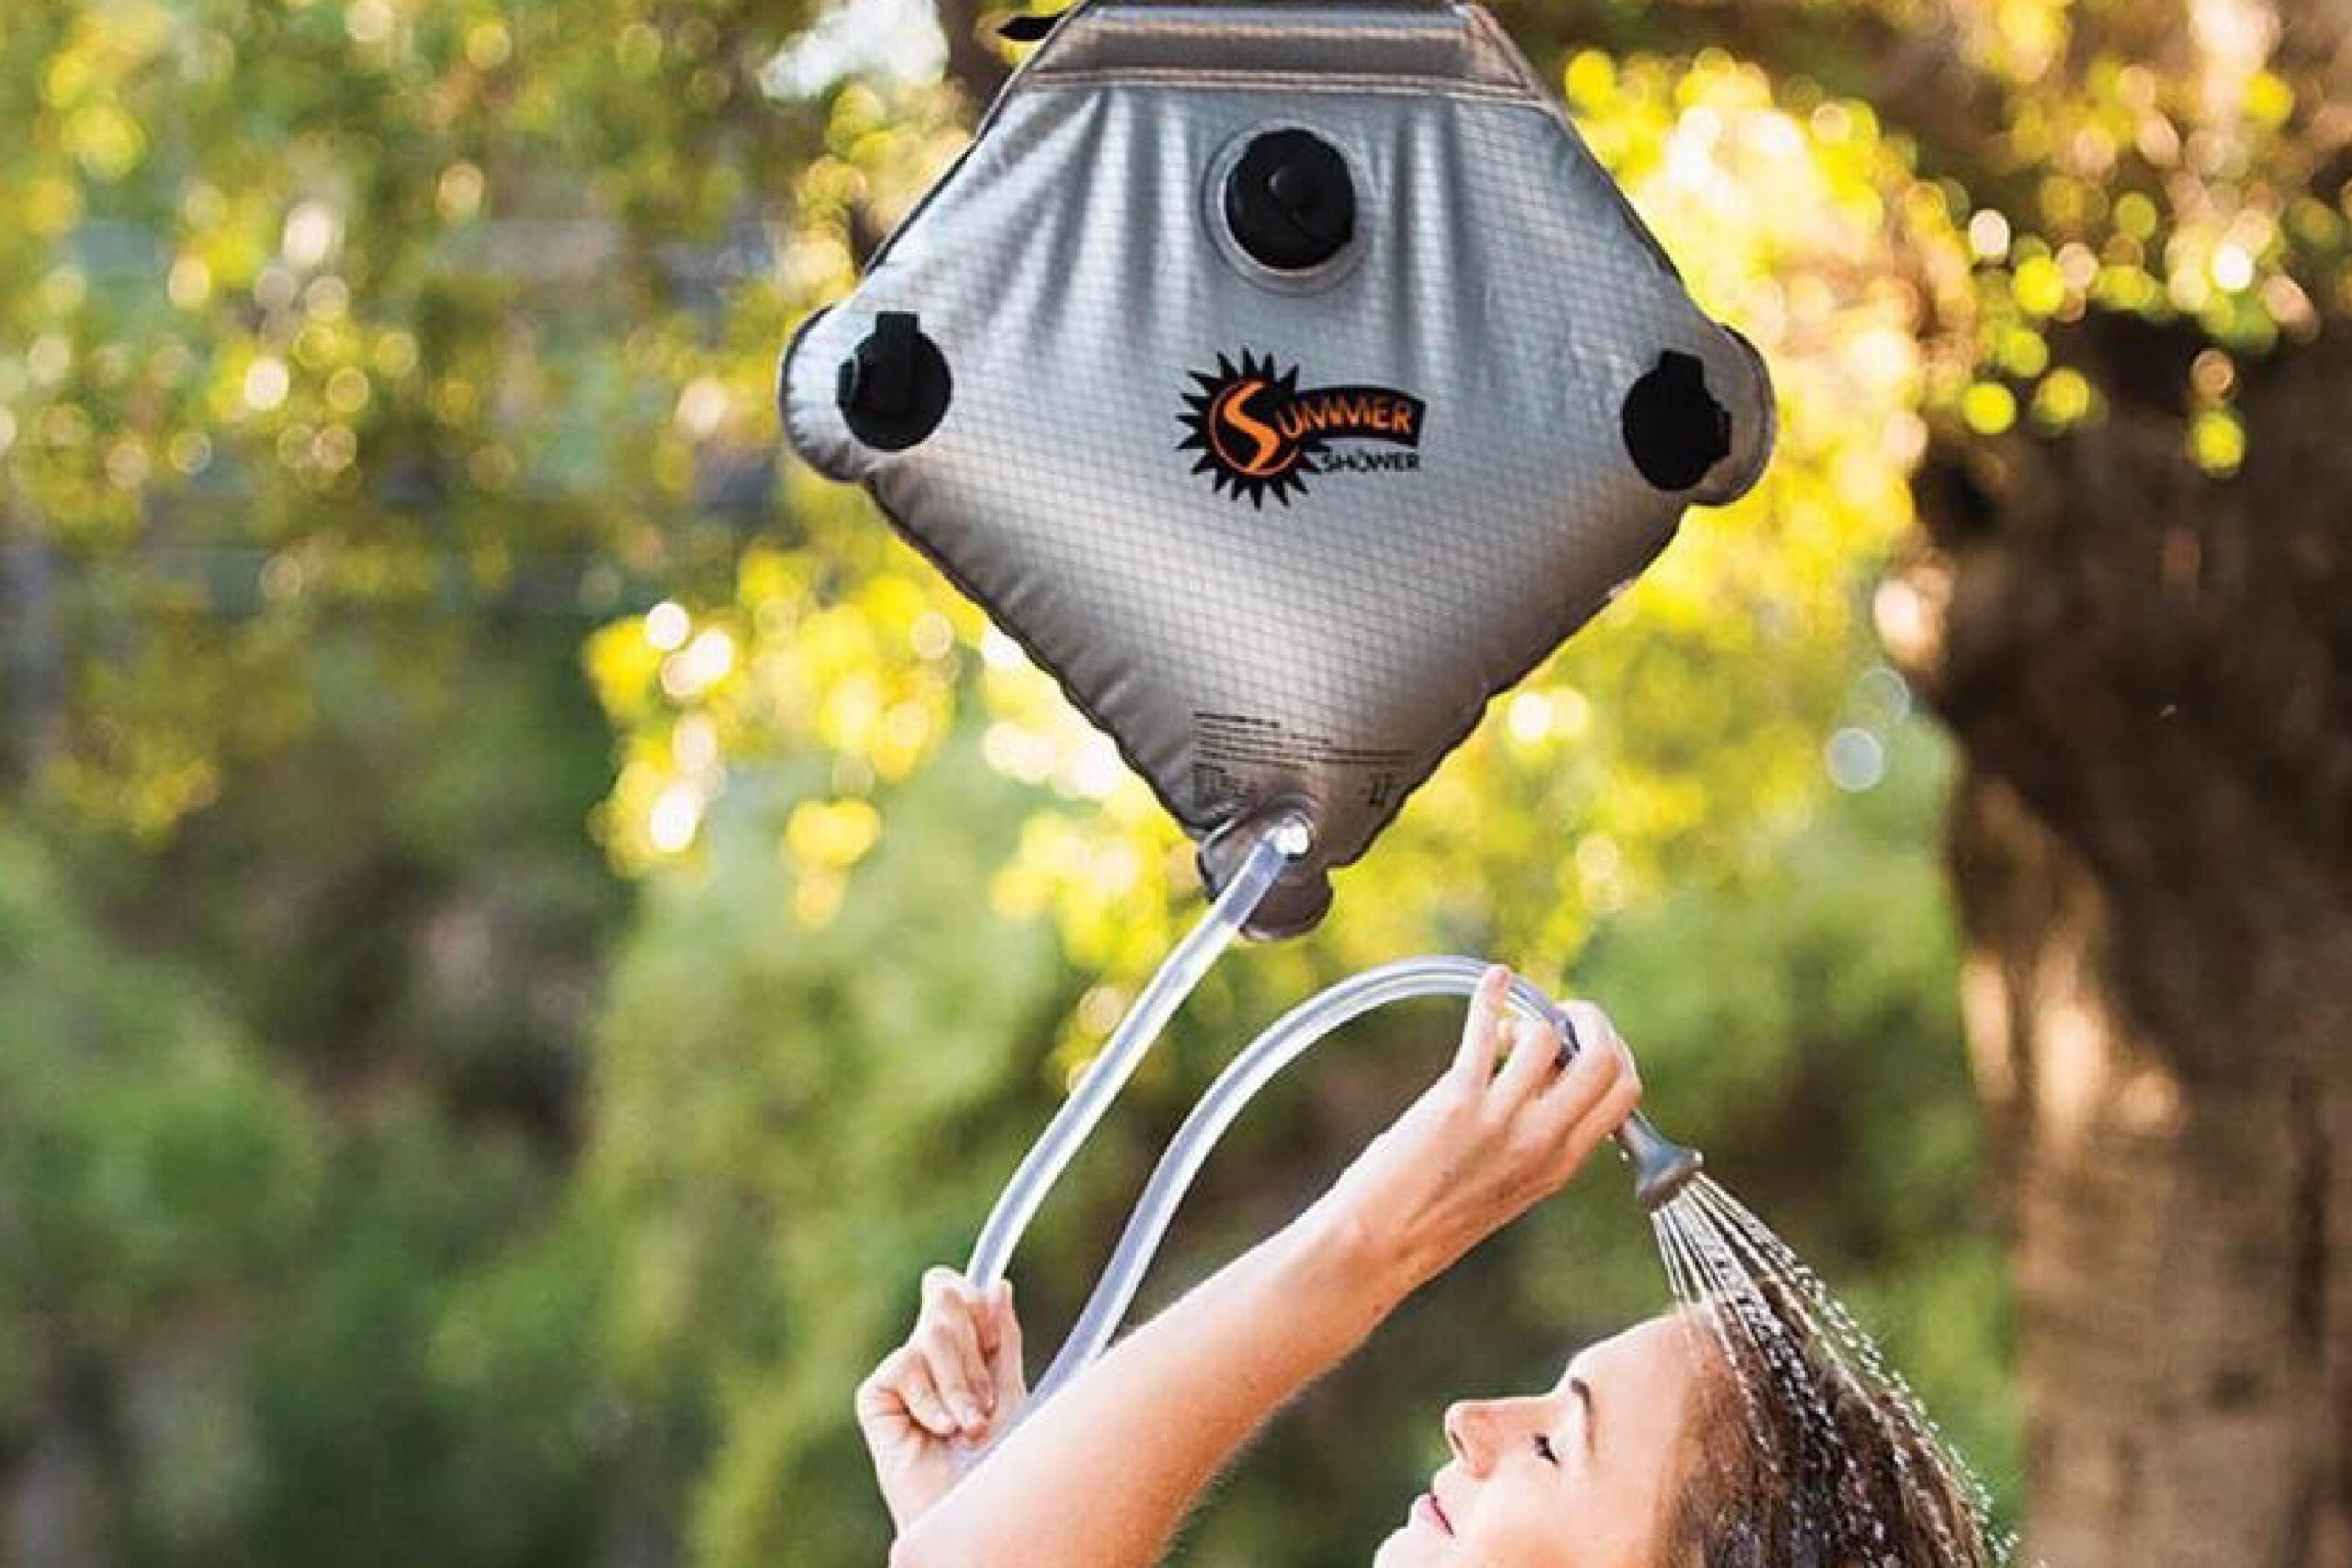 Best Solar Showers For Camping